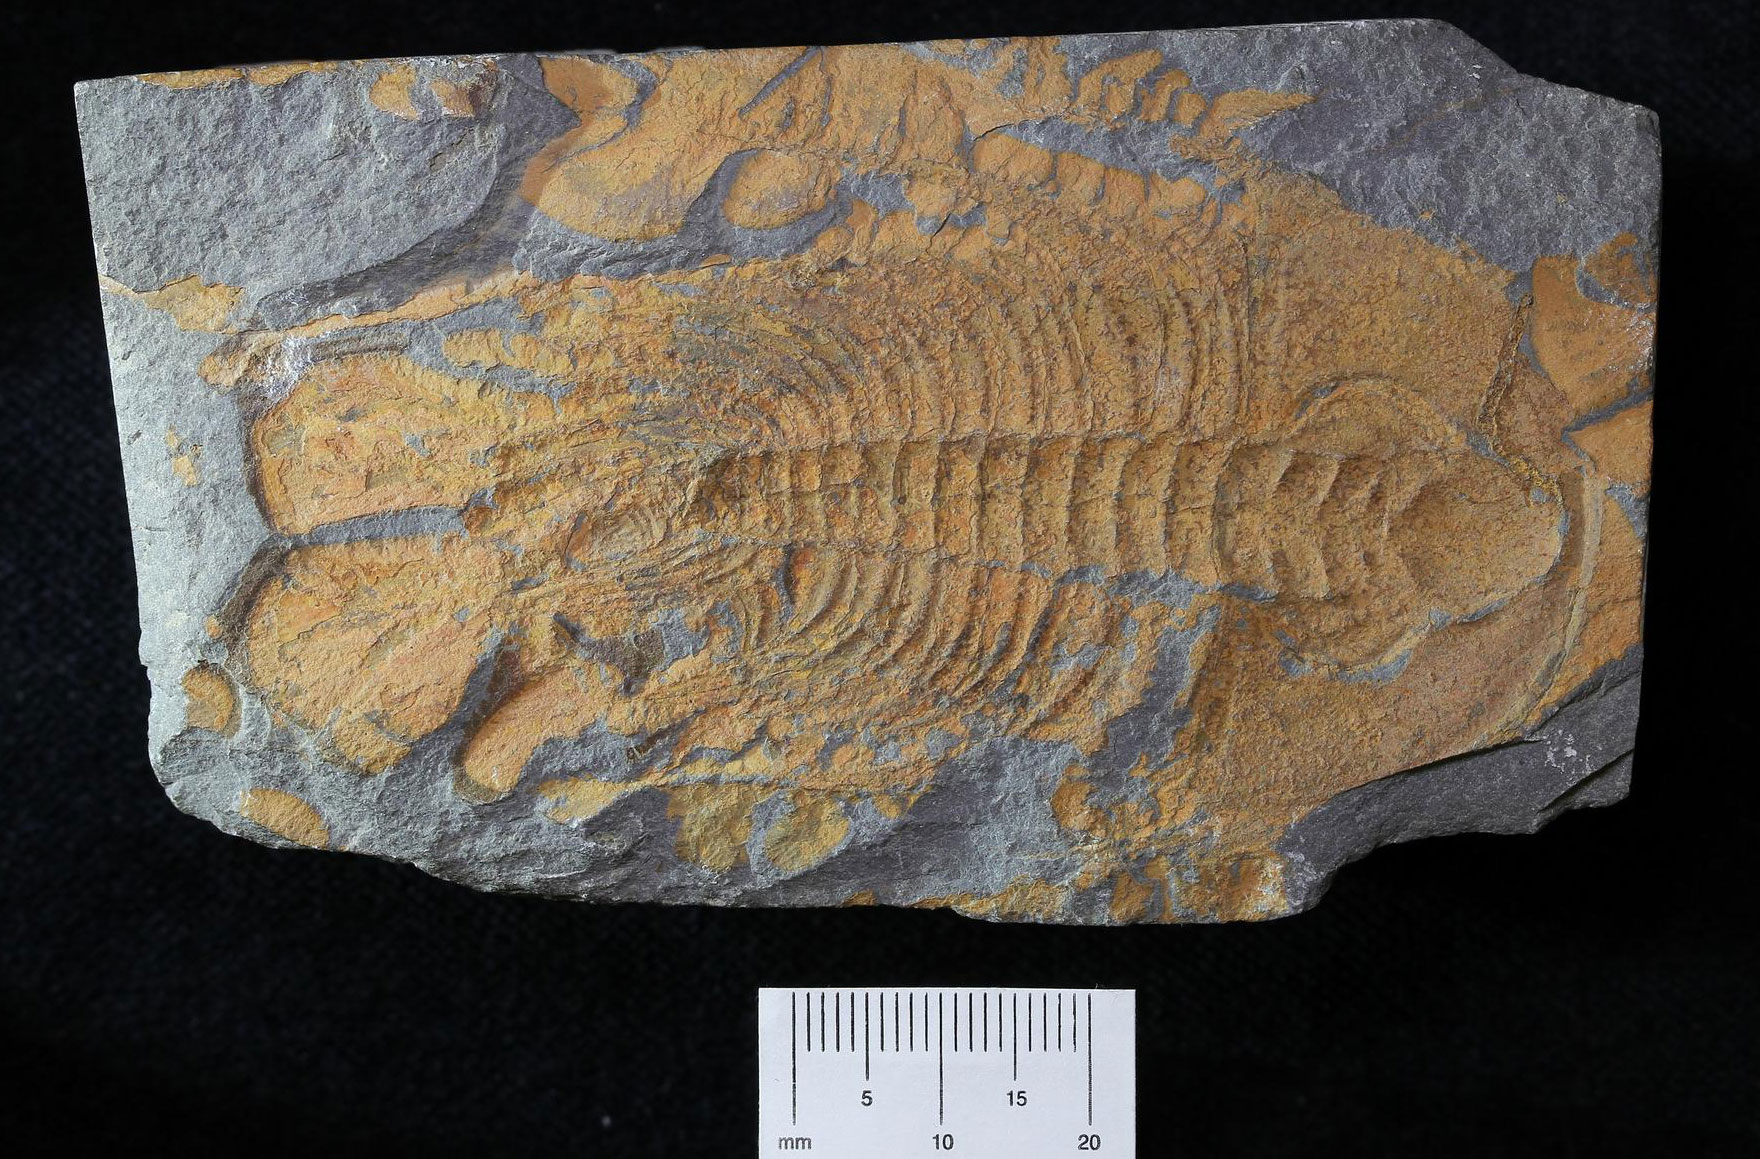 Photograph of a fossil trilobite Olenellus from the Kinzers Formation.